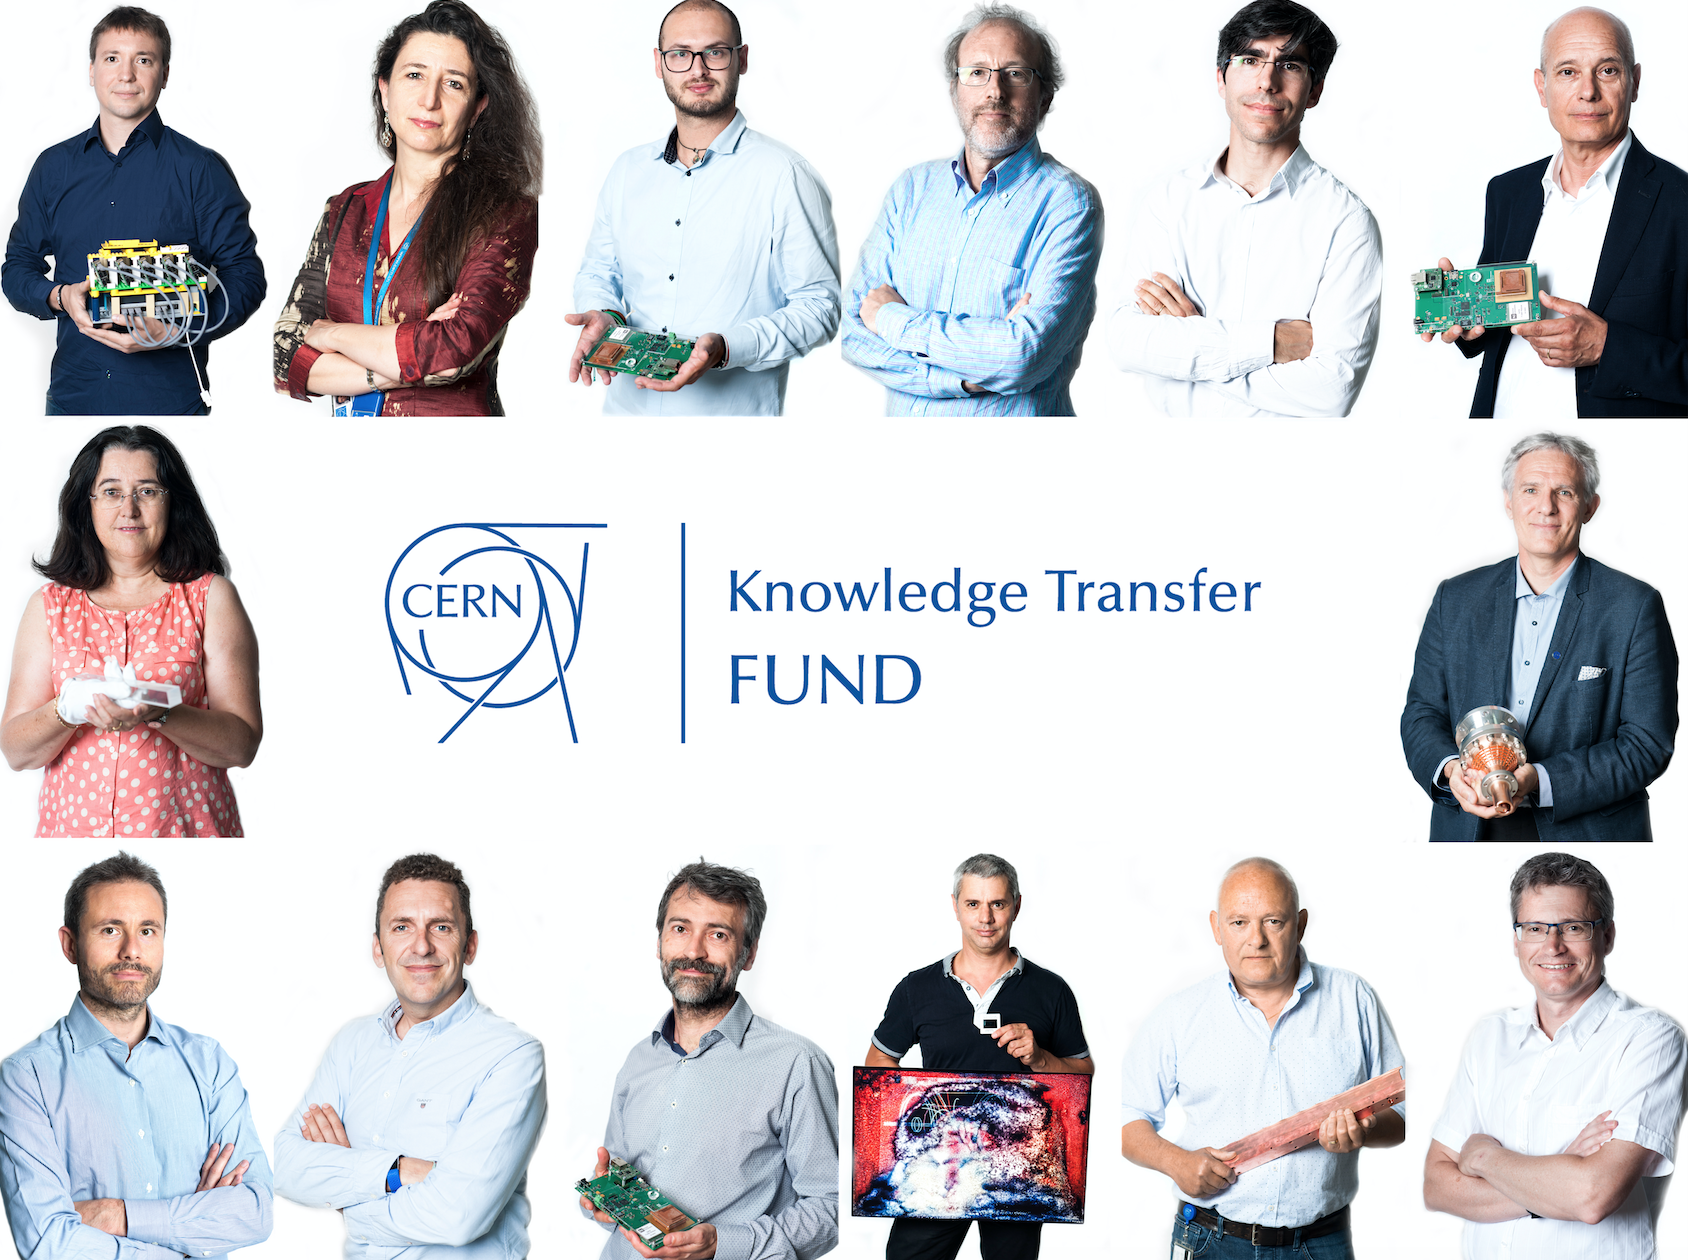 Some of CERN personnel who benefited from the CERN Knowledge Transfer Fund.